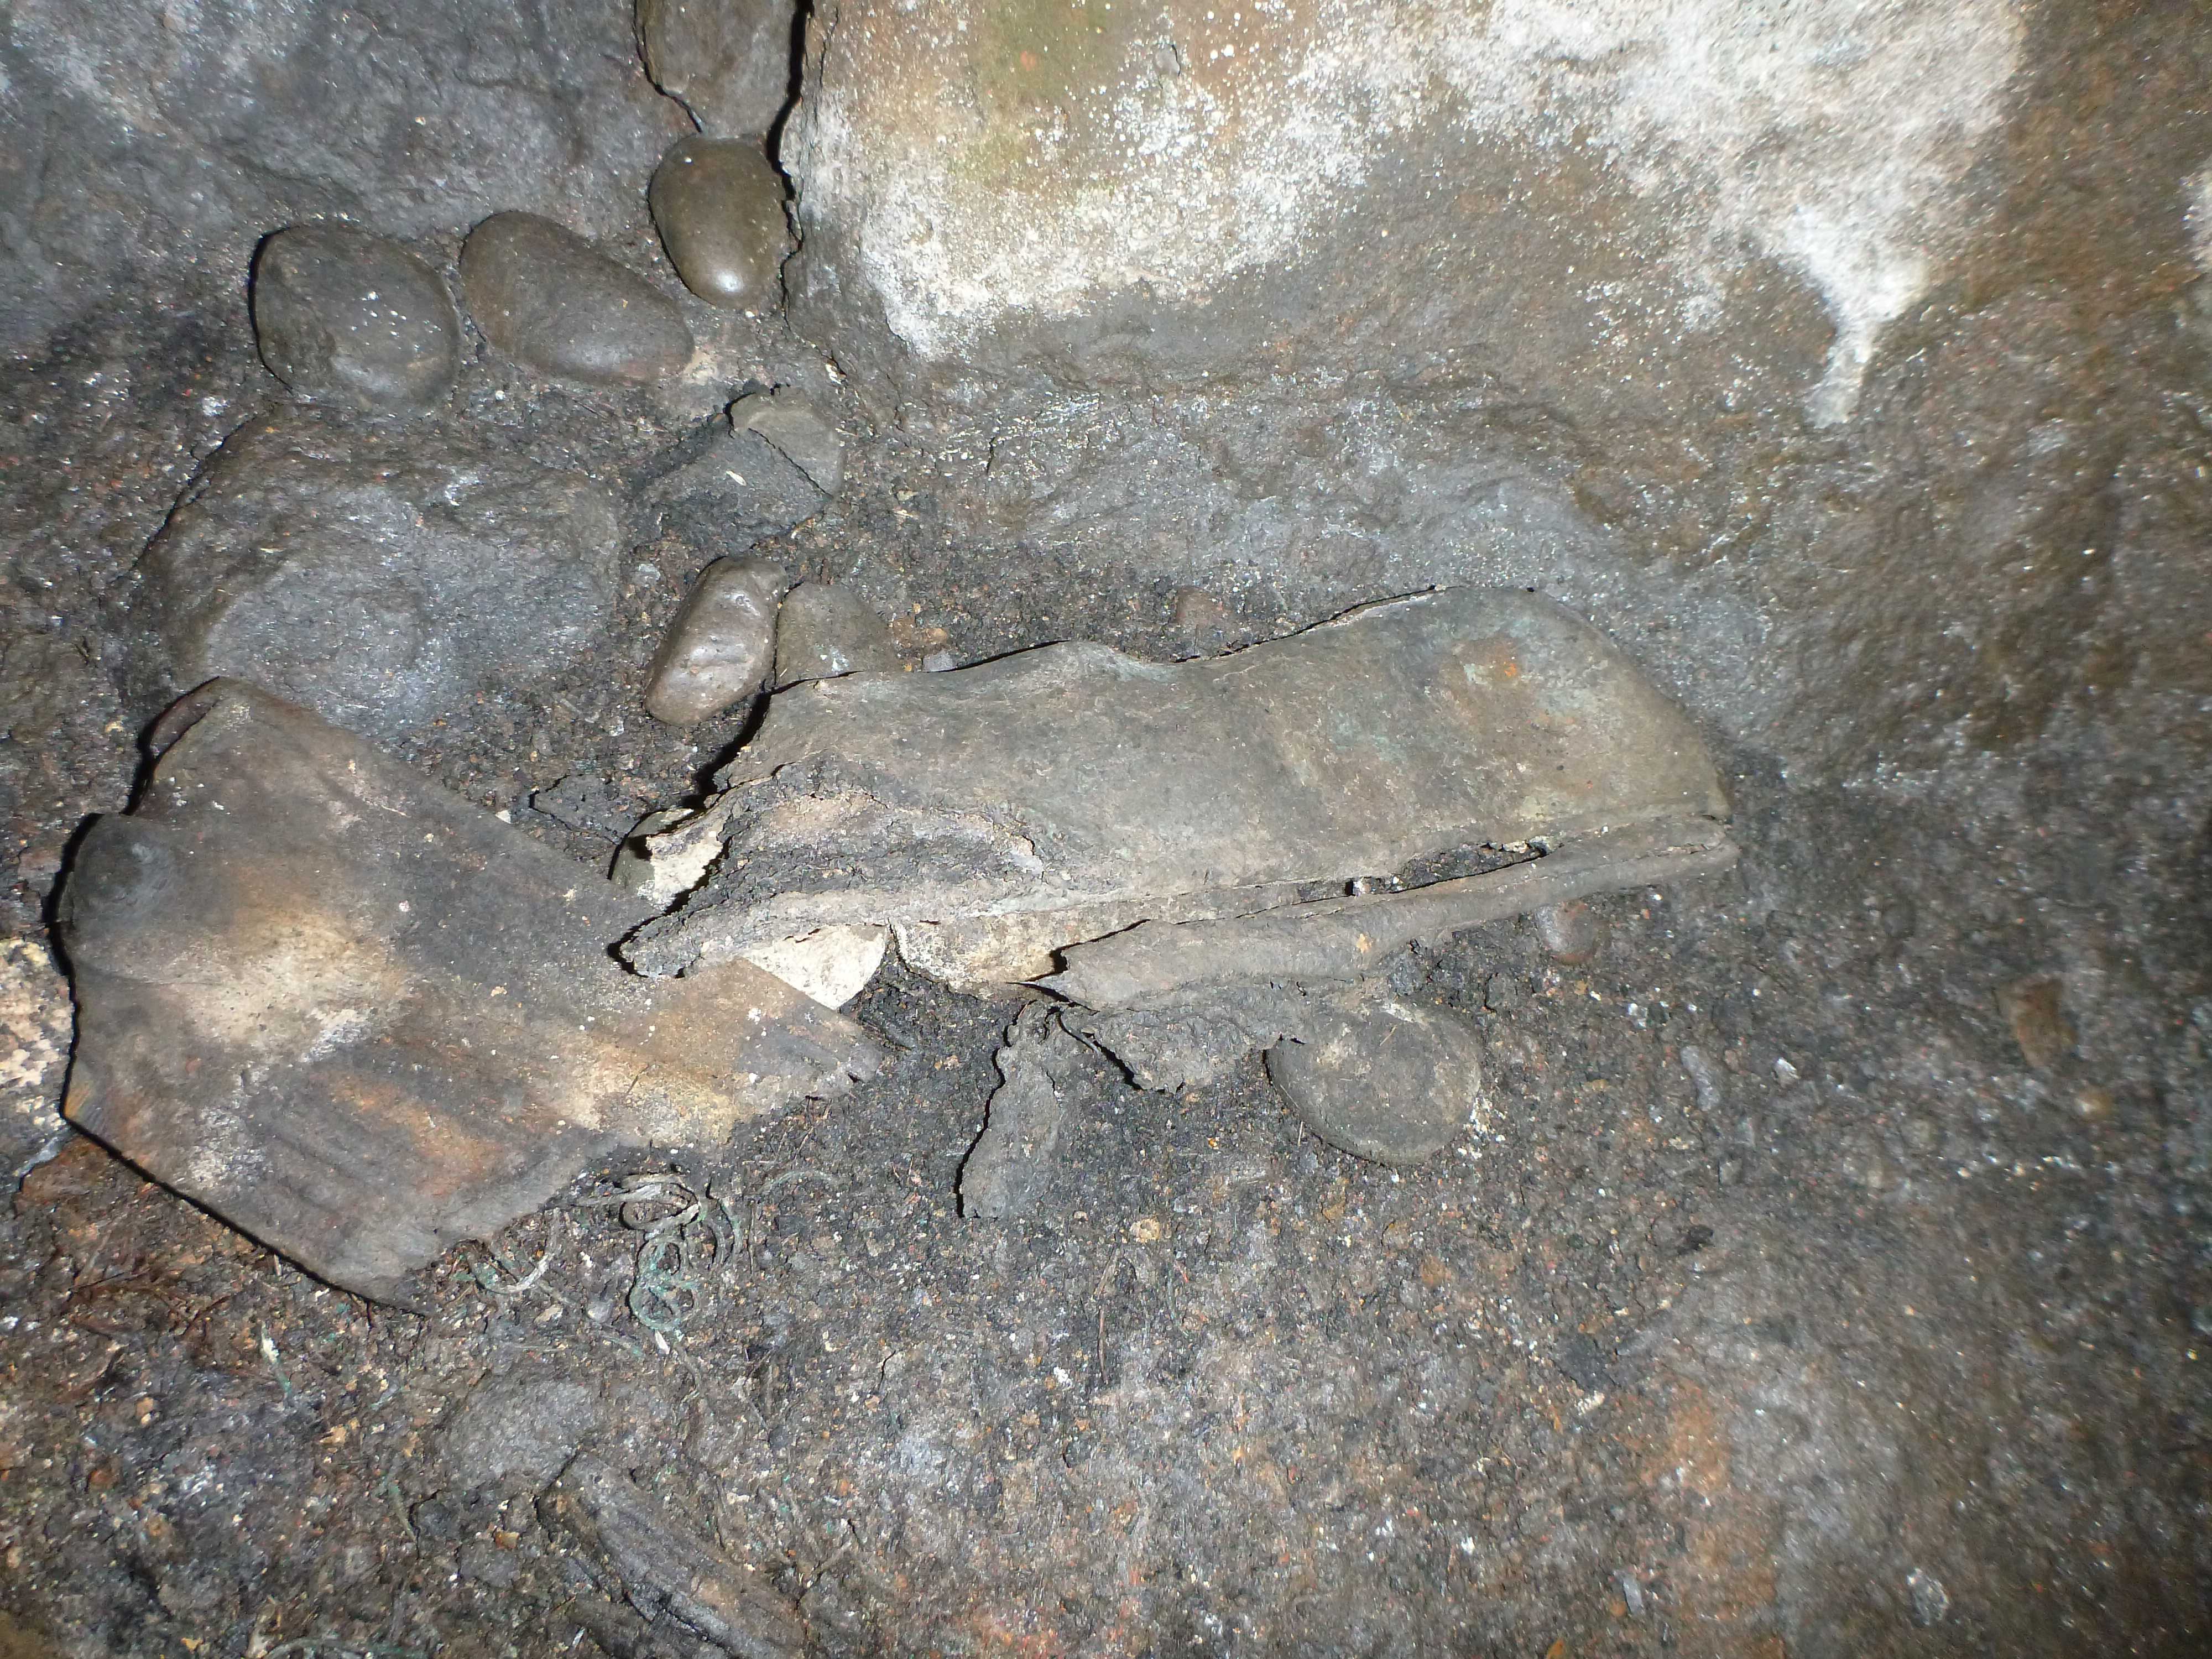 Partial remains of a possible shoe